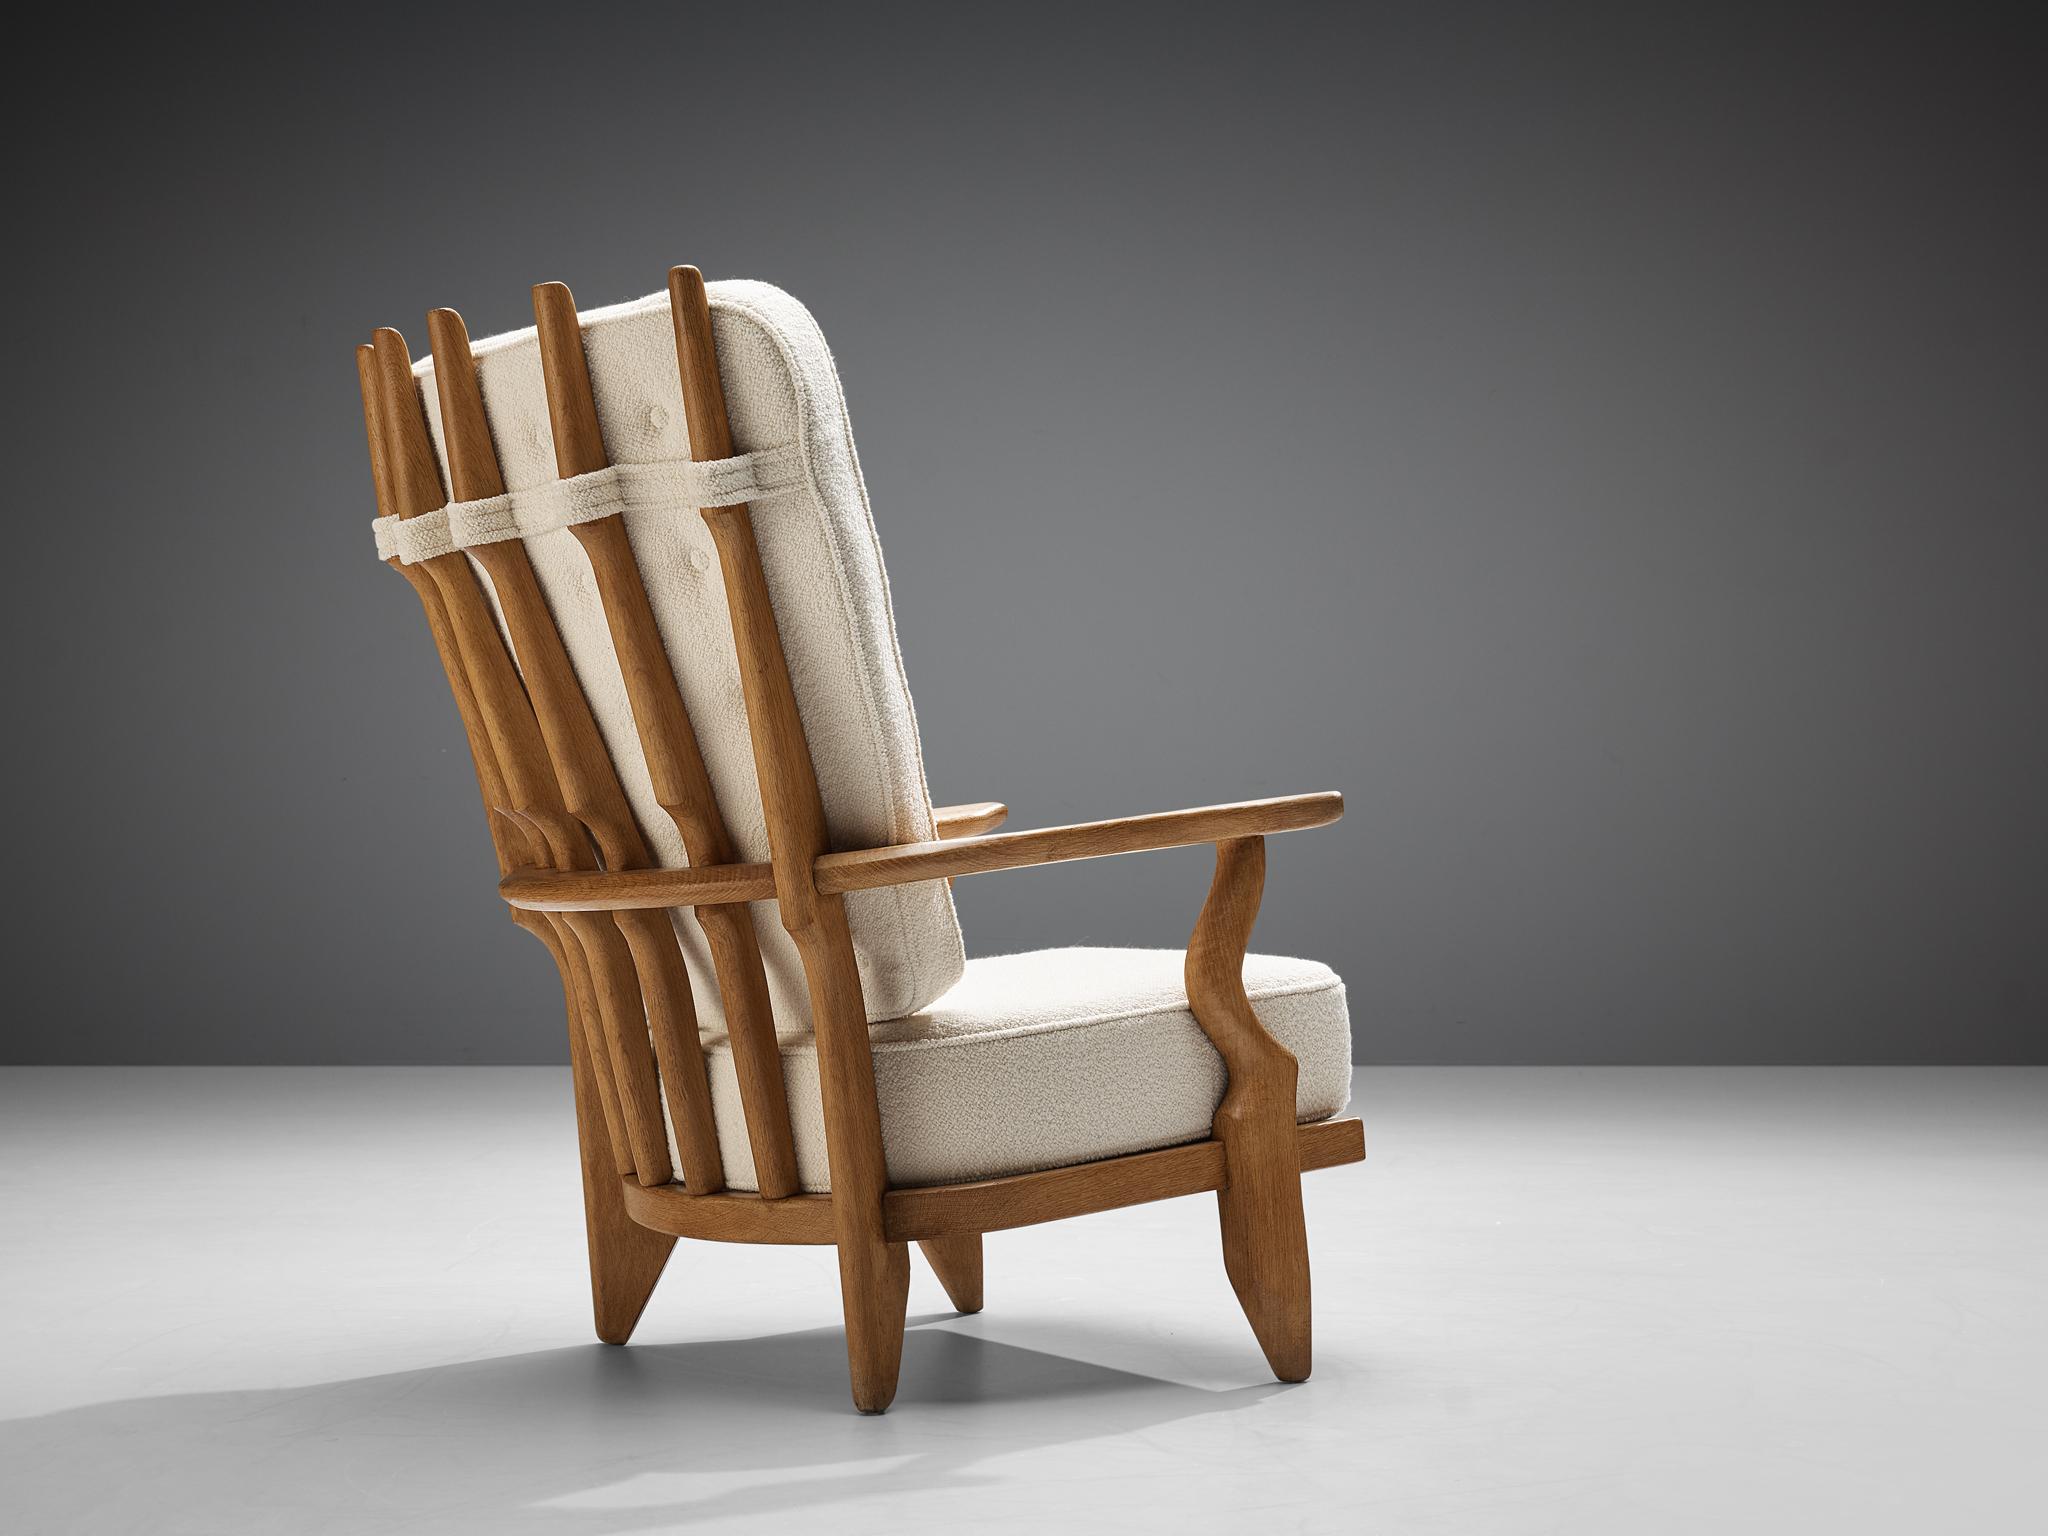 Guillerme et Chambron for Votre Maison, 'Grand Repos' lounge chair, oak, fabric, oak, France, 1960s.

Guillerme & Chambron are known for their high-quality solid oak furniture, of which this is another great example. This chair has an interesting,